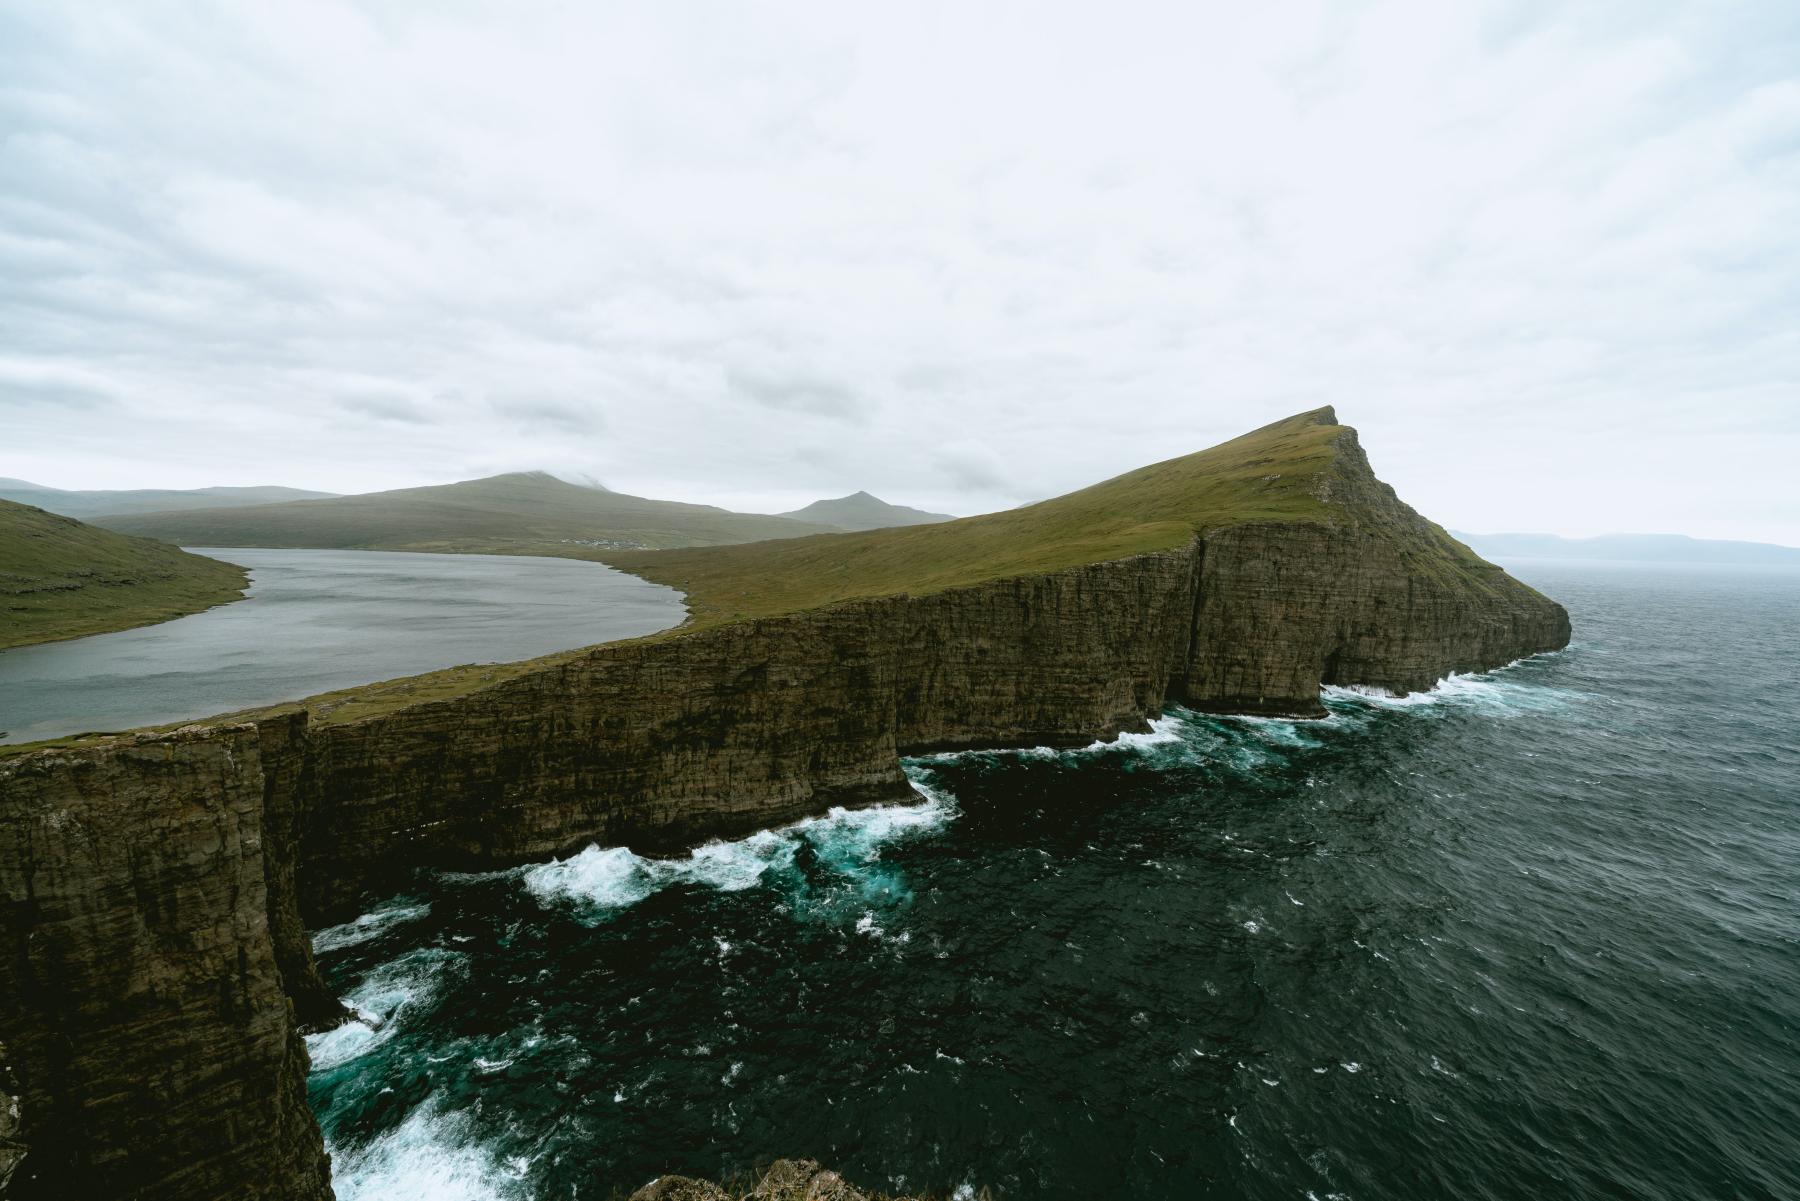 Sørvágsvatn is the largest lake in the Faroe Islands. It is situated on the island of Vágar between the municipalities of Sørvágur and Vágar.